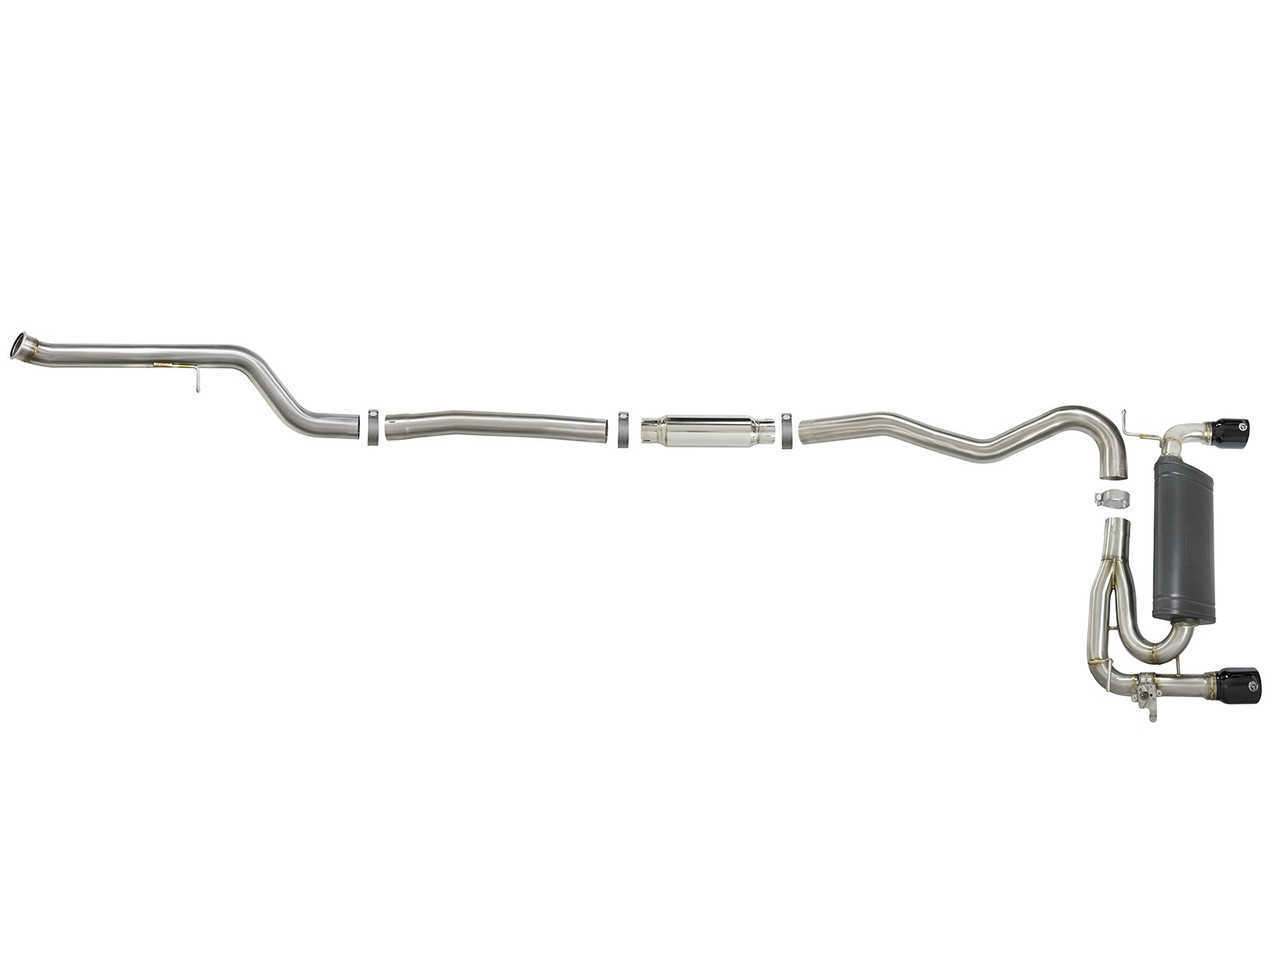 BMW MACH Force-Xp 3in to 2.5in 304 Stainless Steel Cat-Back Exhaust System - aFe POWER 49-36340-B